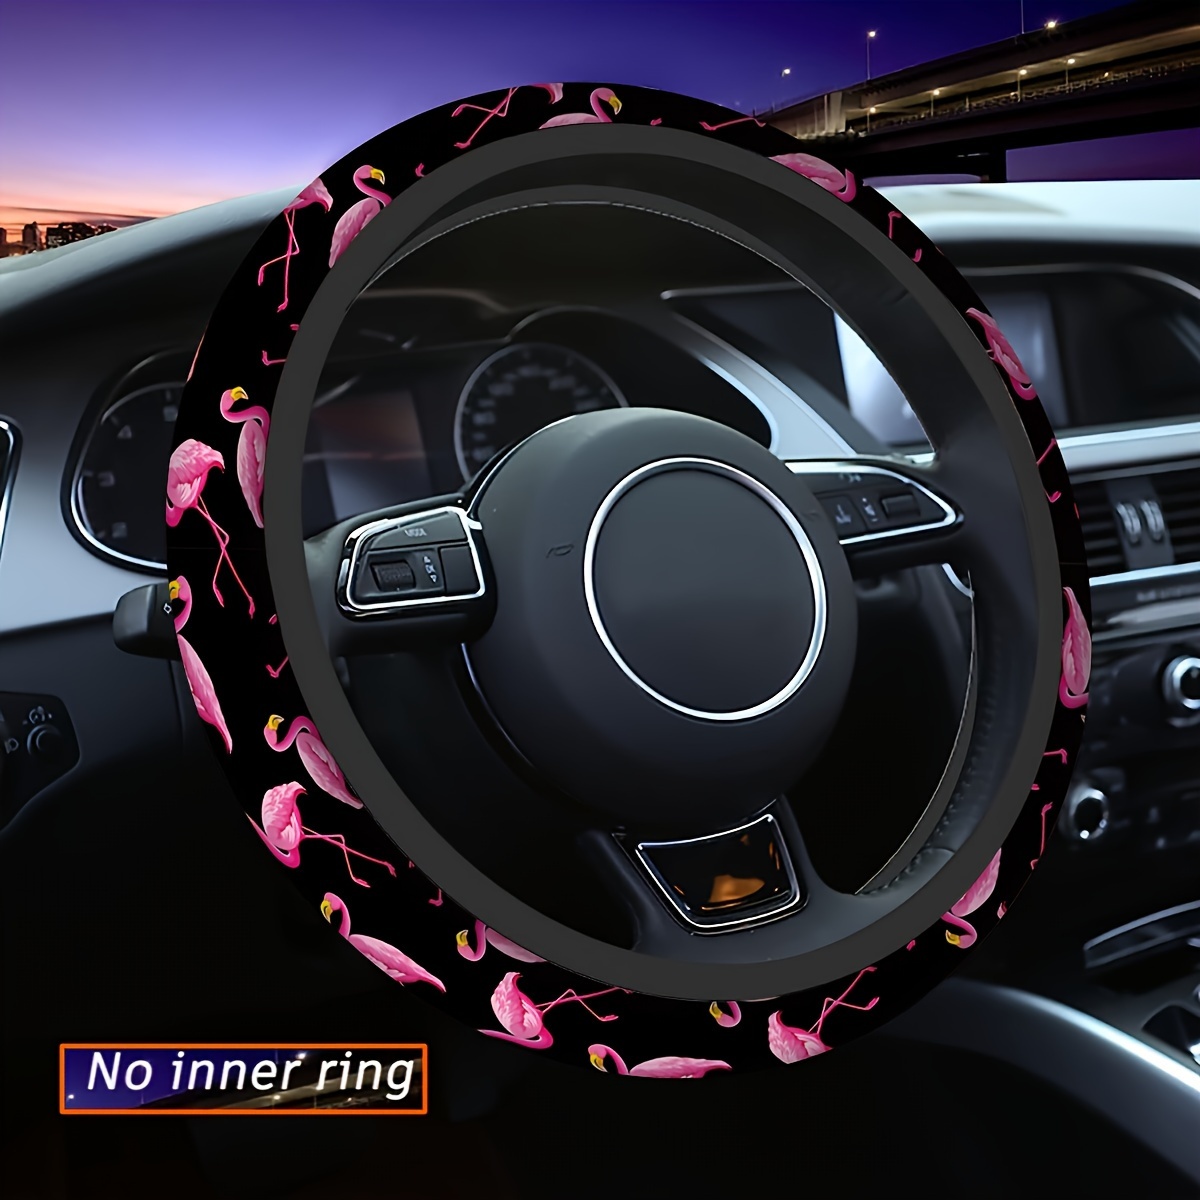 

Flamingo Print Steering Wheel Cover, Soft Polyester Fiber, Breathable Sweat Absorption, Lightweight, No Inner Ring - Universal 15in/38cm Fit